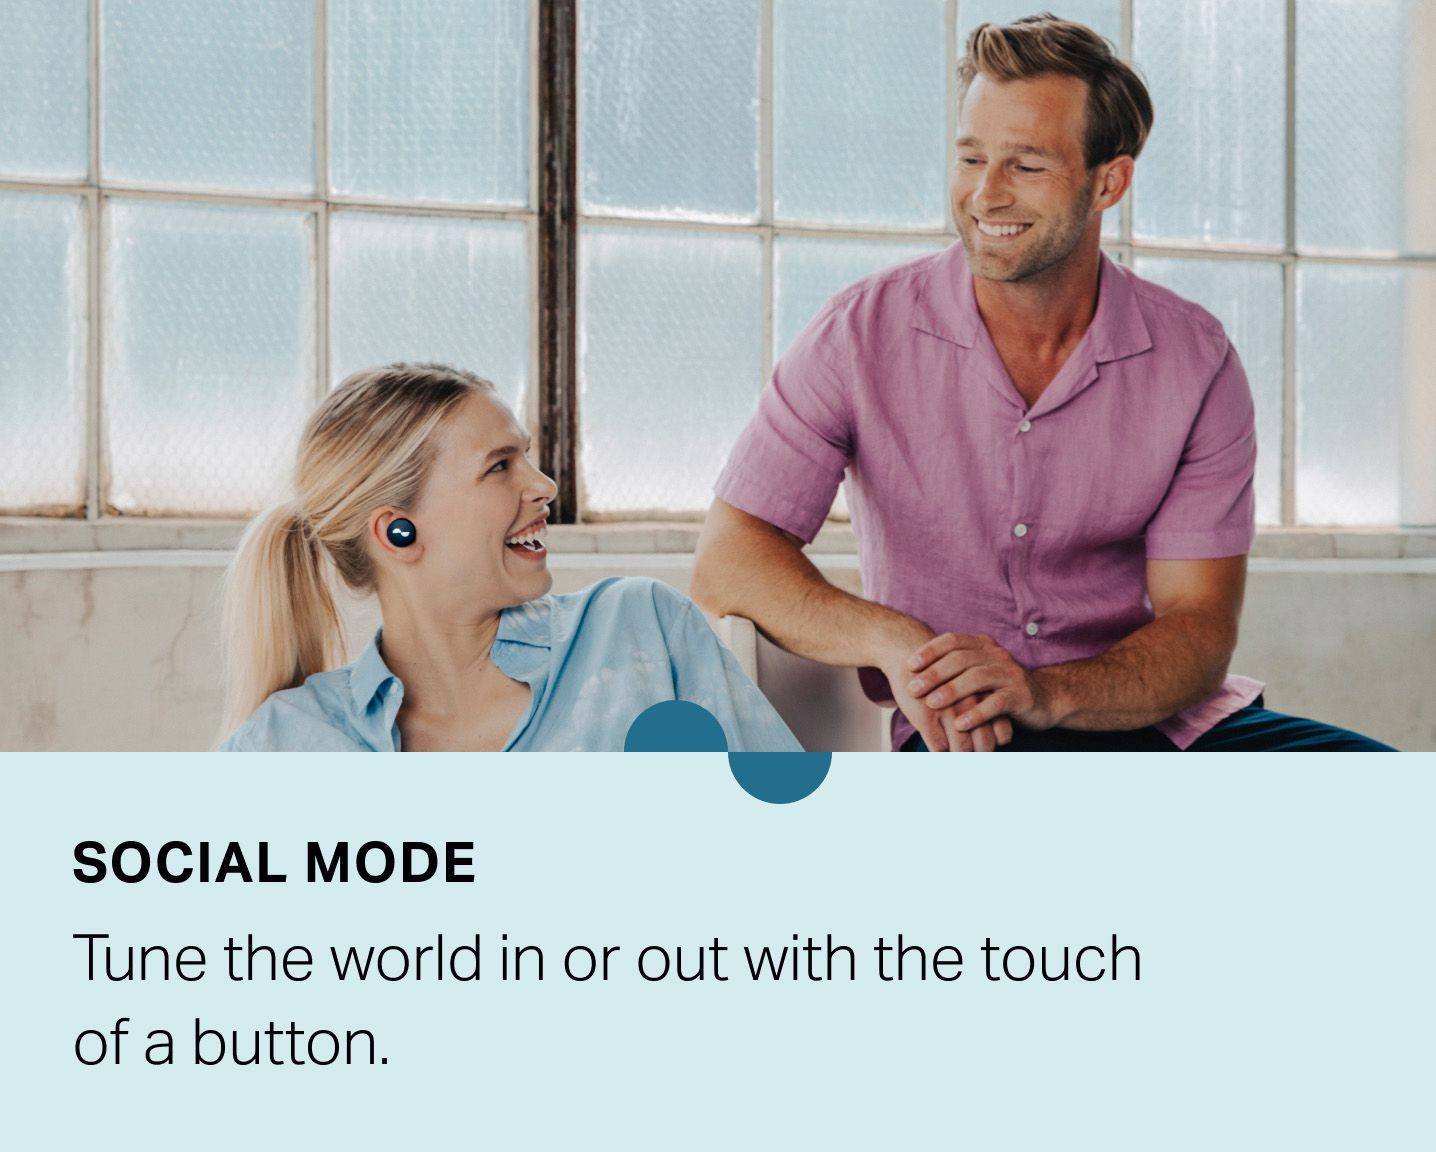 Person wearing NURATRUE earbuds with Social Mode on, talking to another person — "Social Mode: Tune the world in or out with the touch of a button."